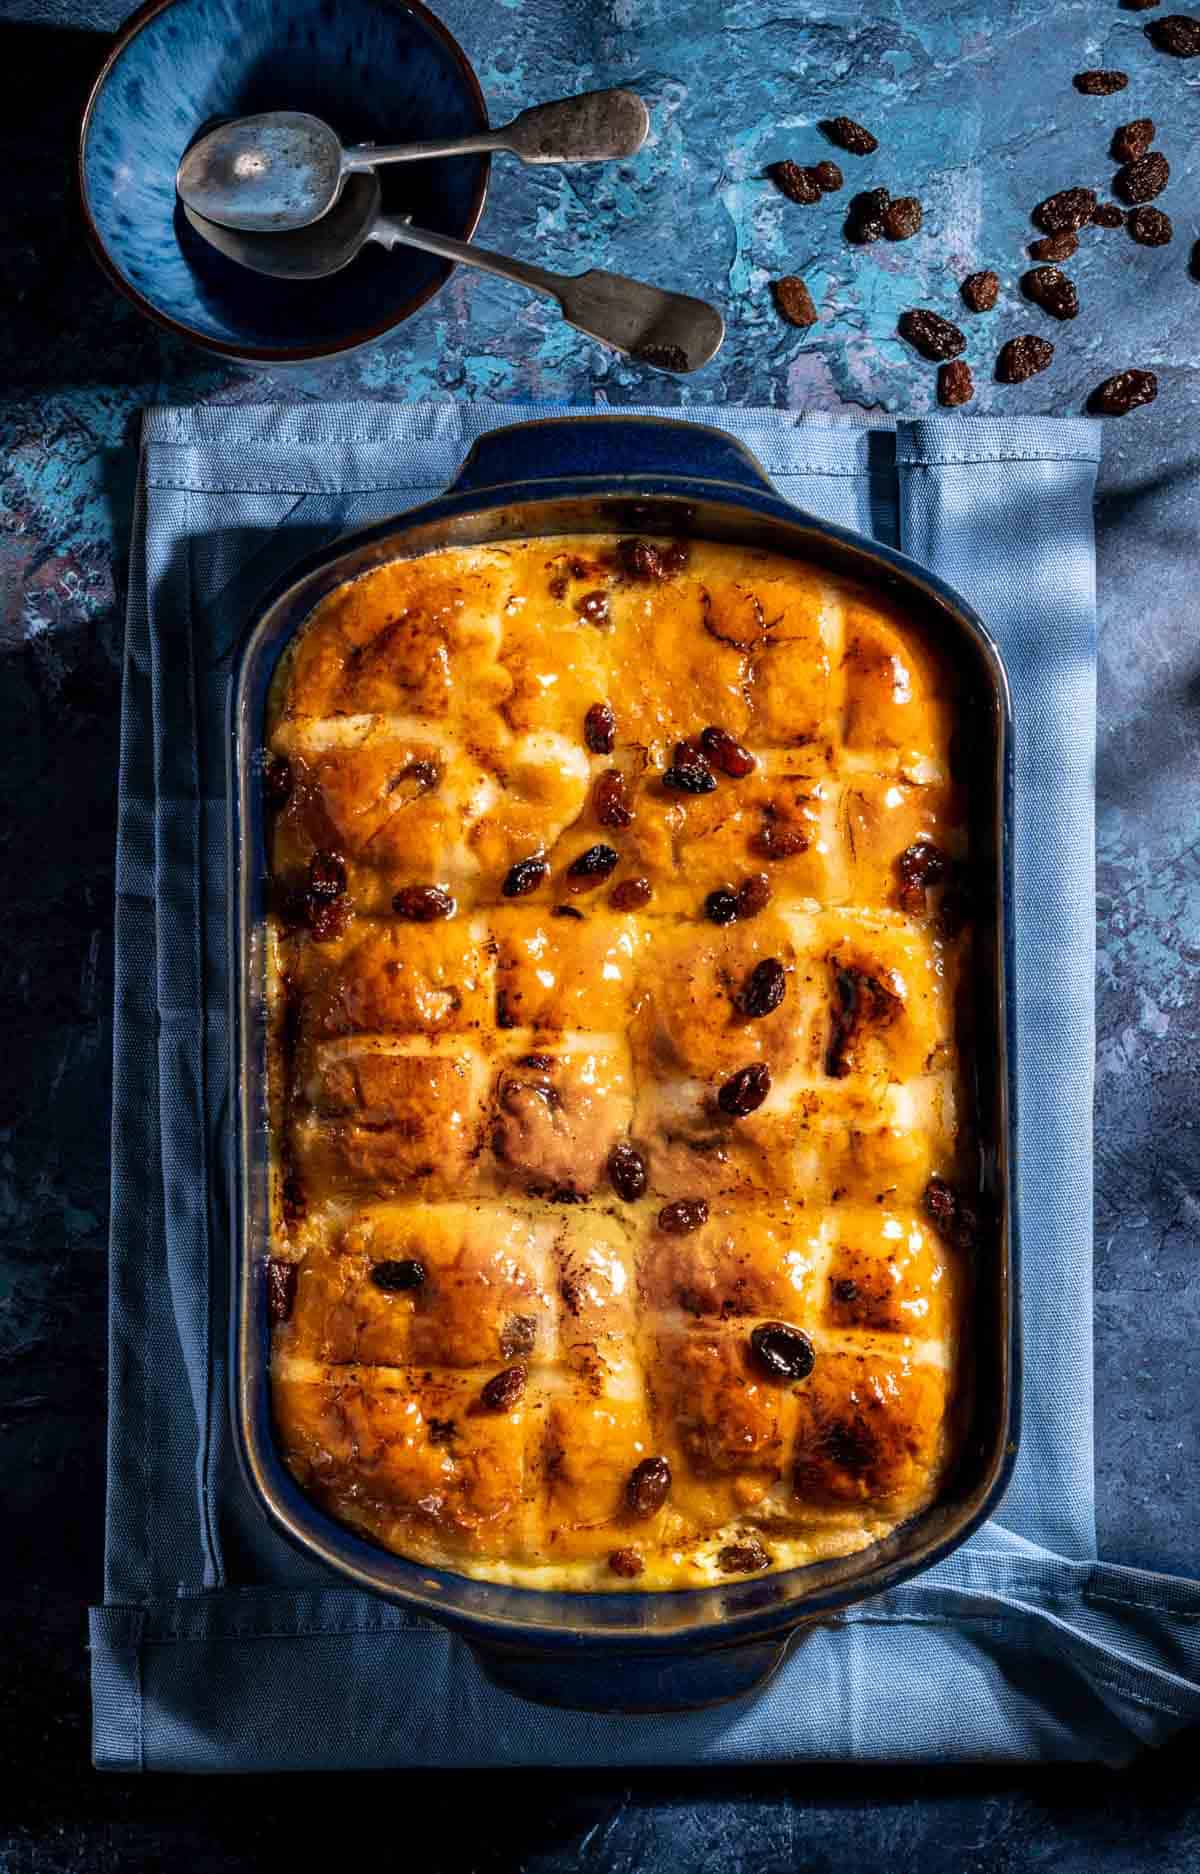 A hot cross bun bread and butter pudding in a blue baking dish, on a blue background.